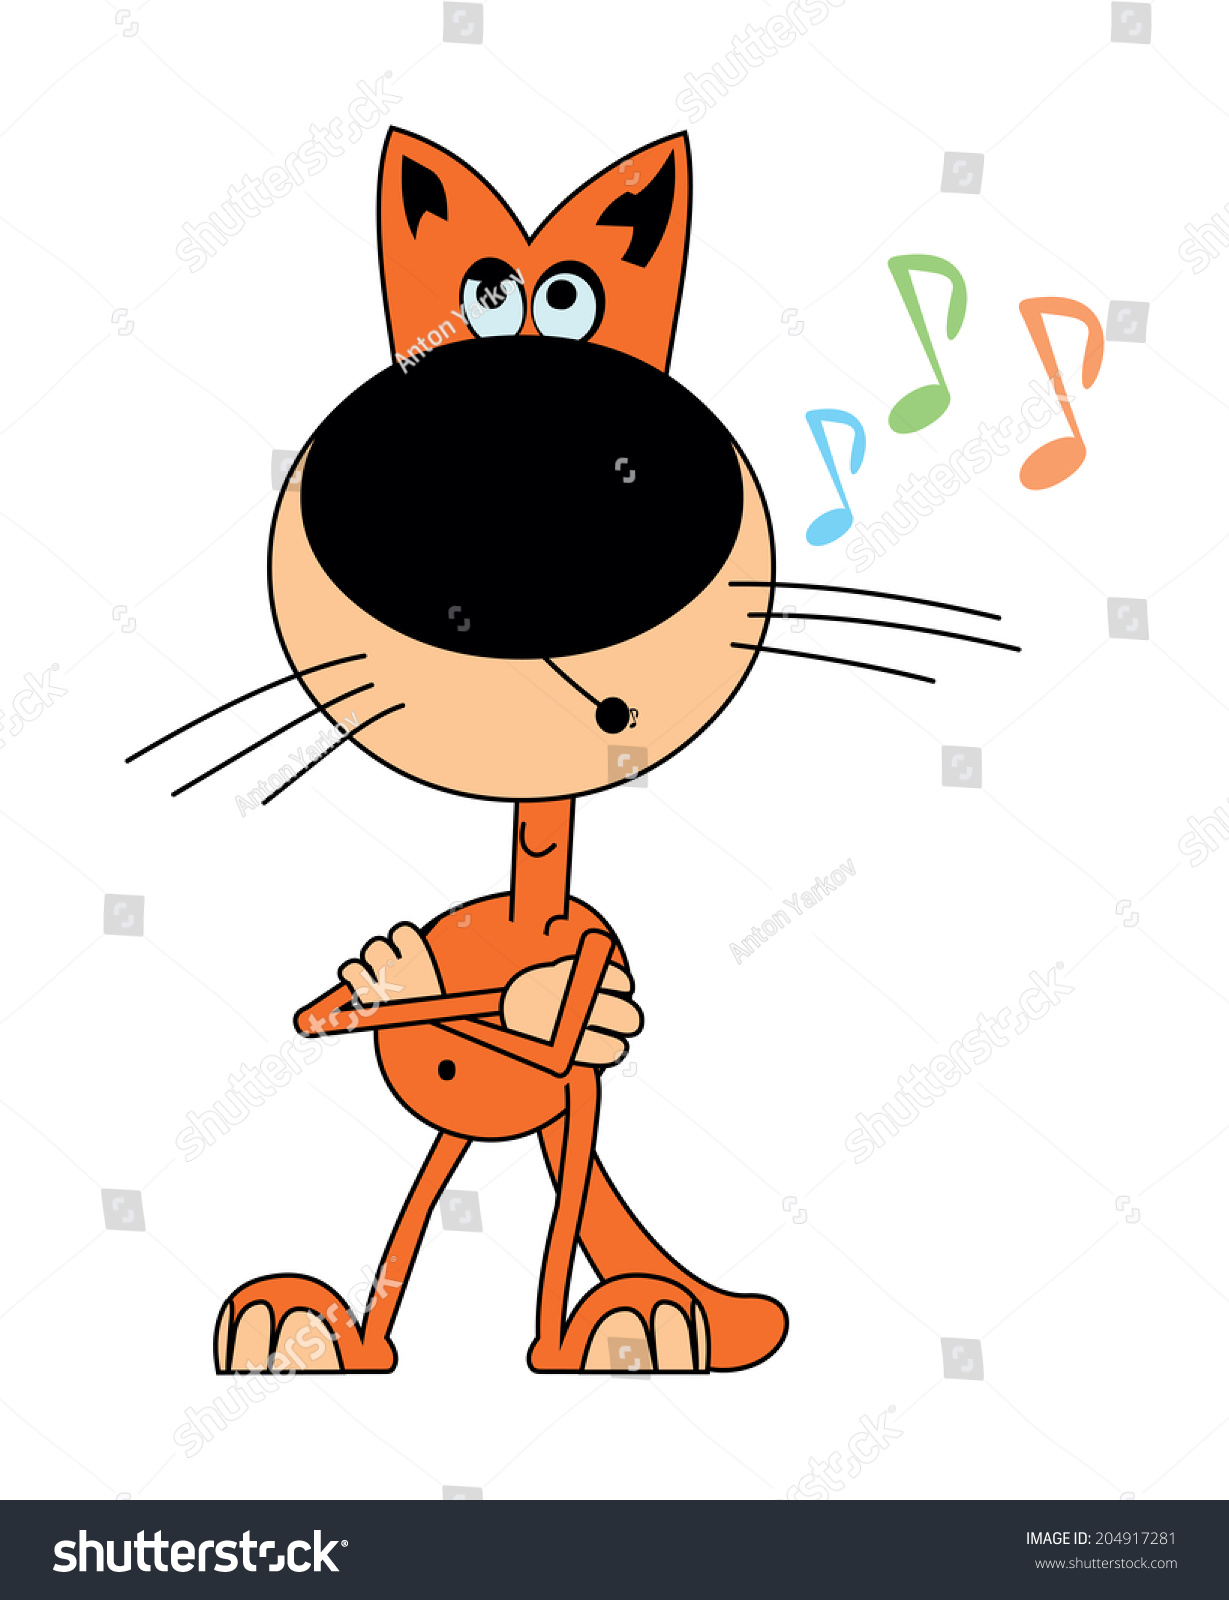 Orange Cat Whistling This Cartoon Character Stock Vector Royalty Free Shutterstock